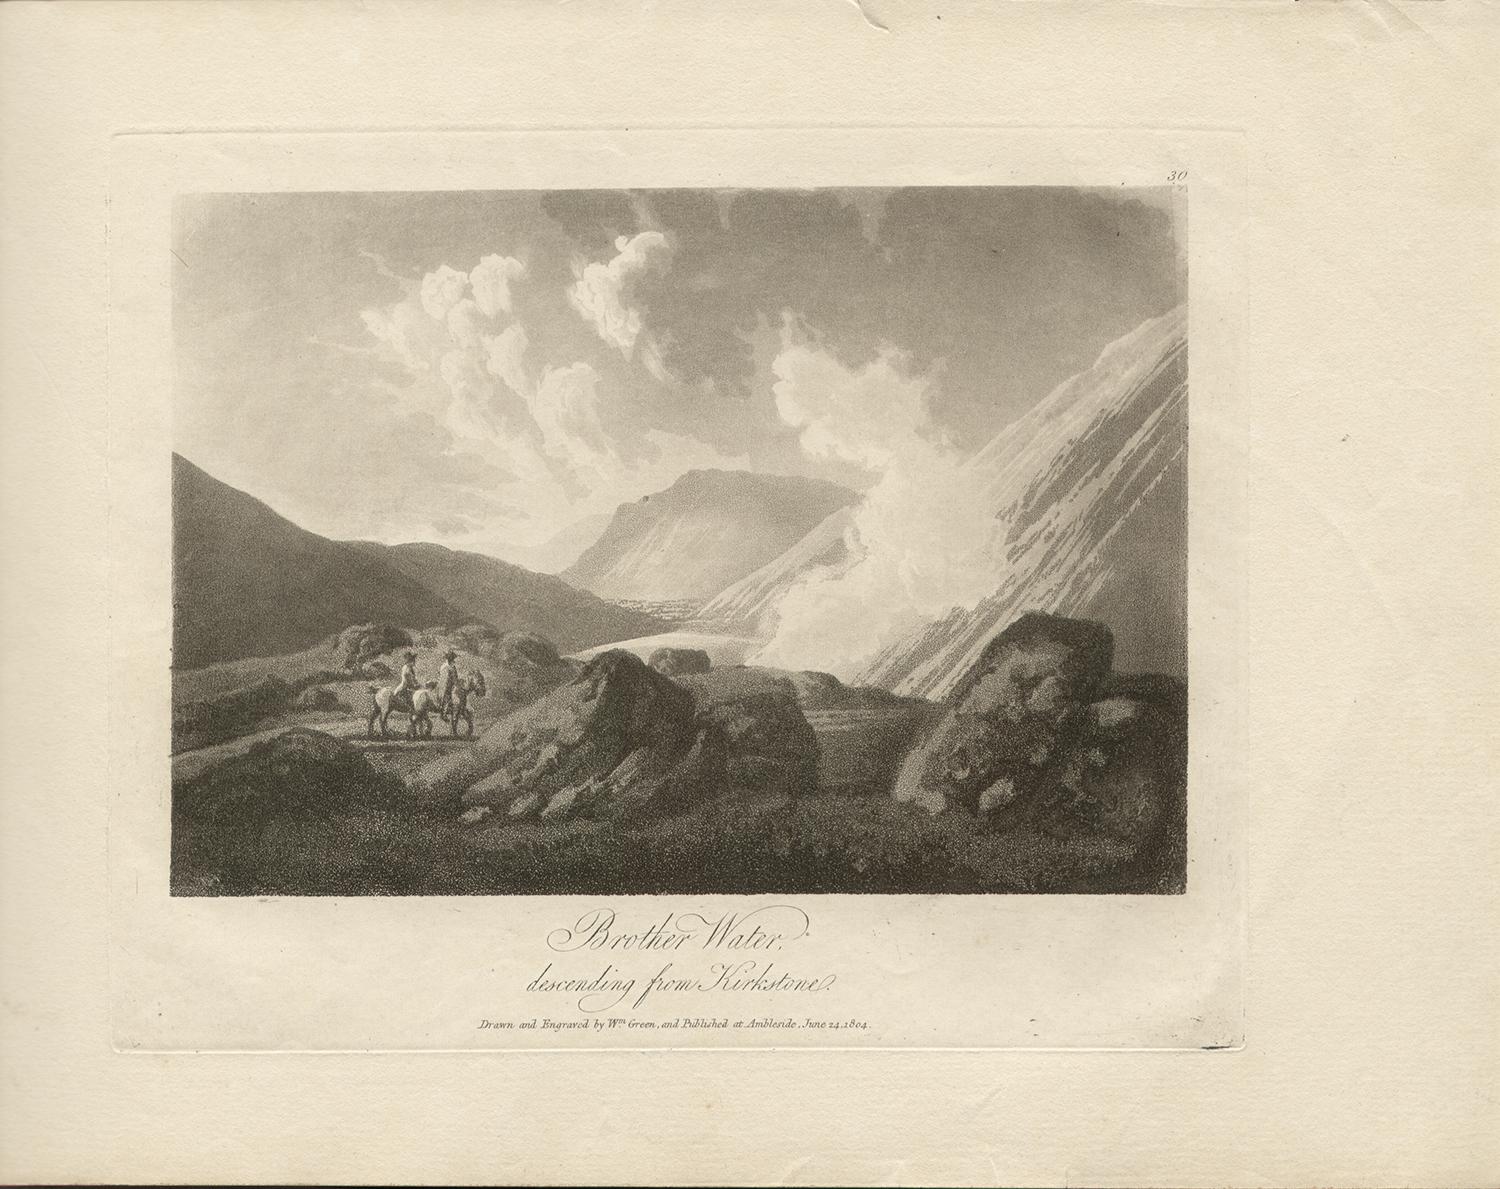 Brother Water, Lake District scenery C19th English aquatint - Print by William Green